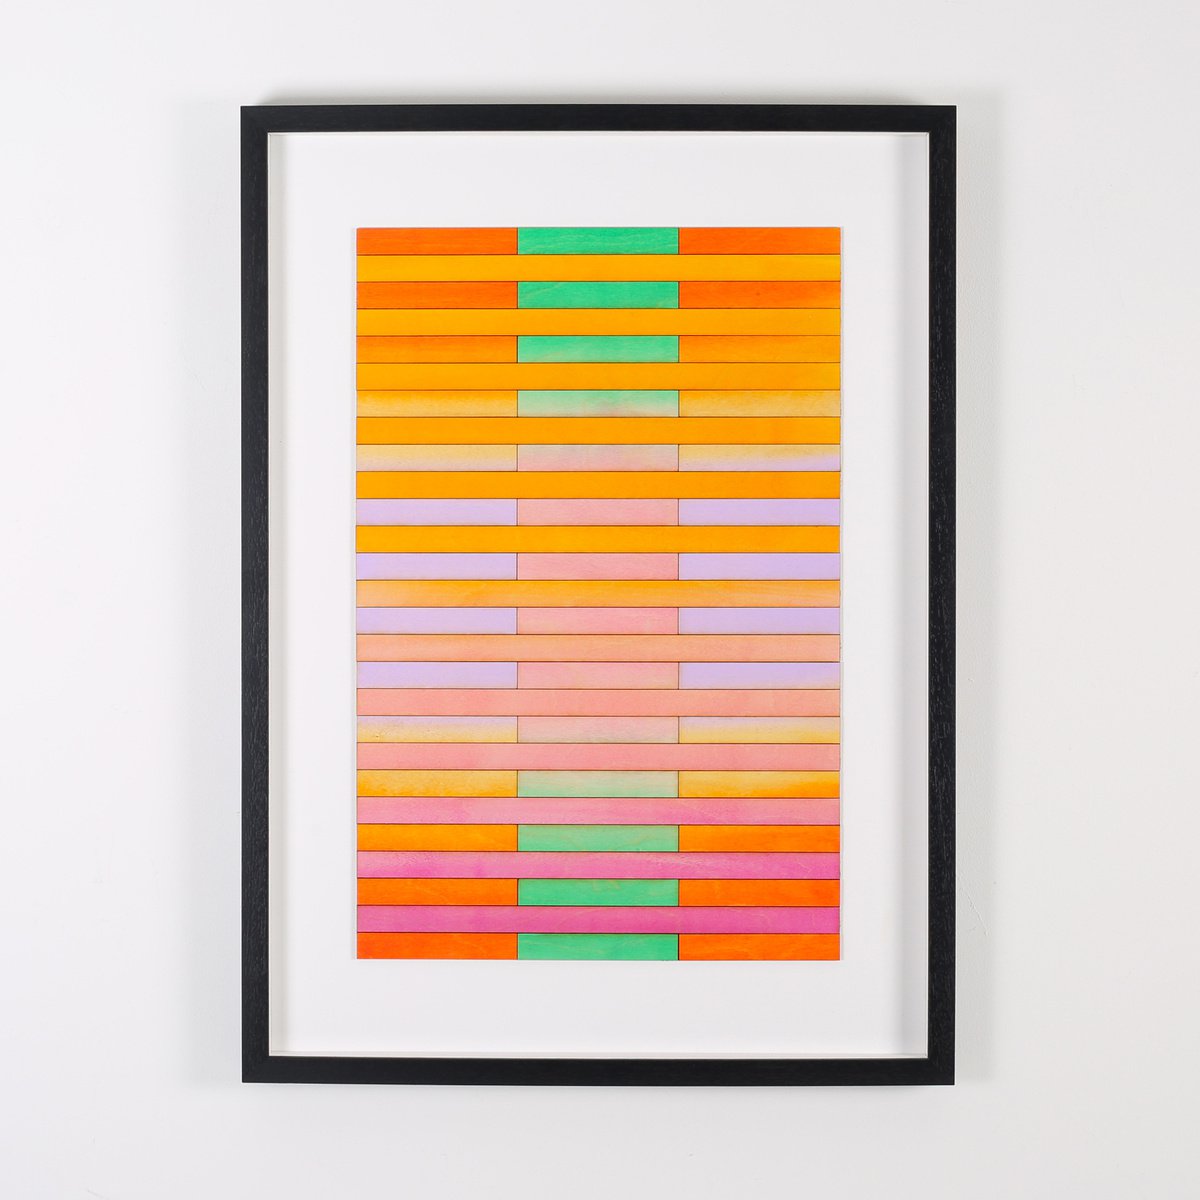 Three Panel Abstract Geometric Gradient Painting Number Four by Amelia Coward